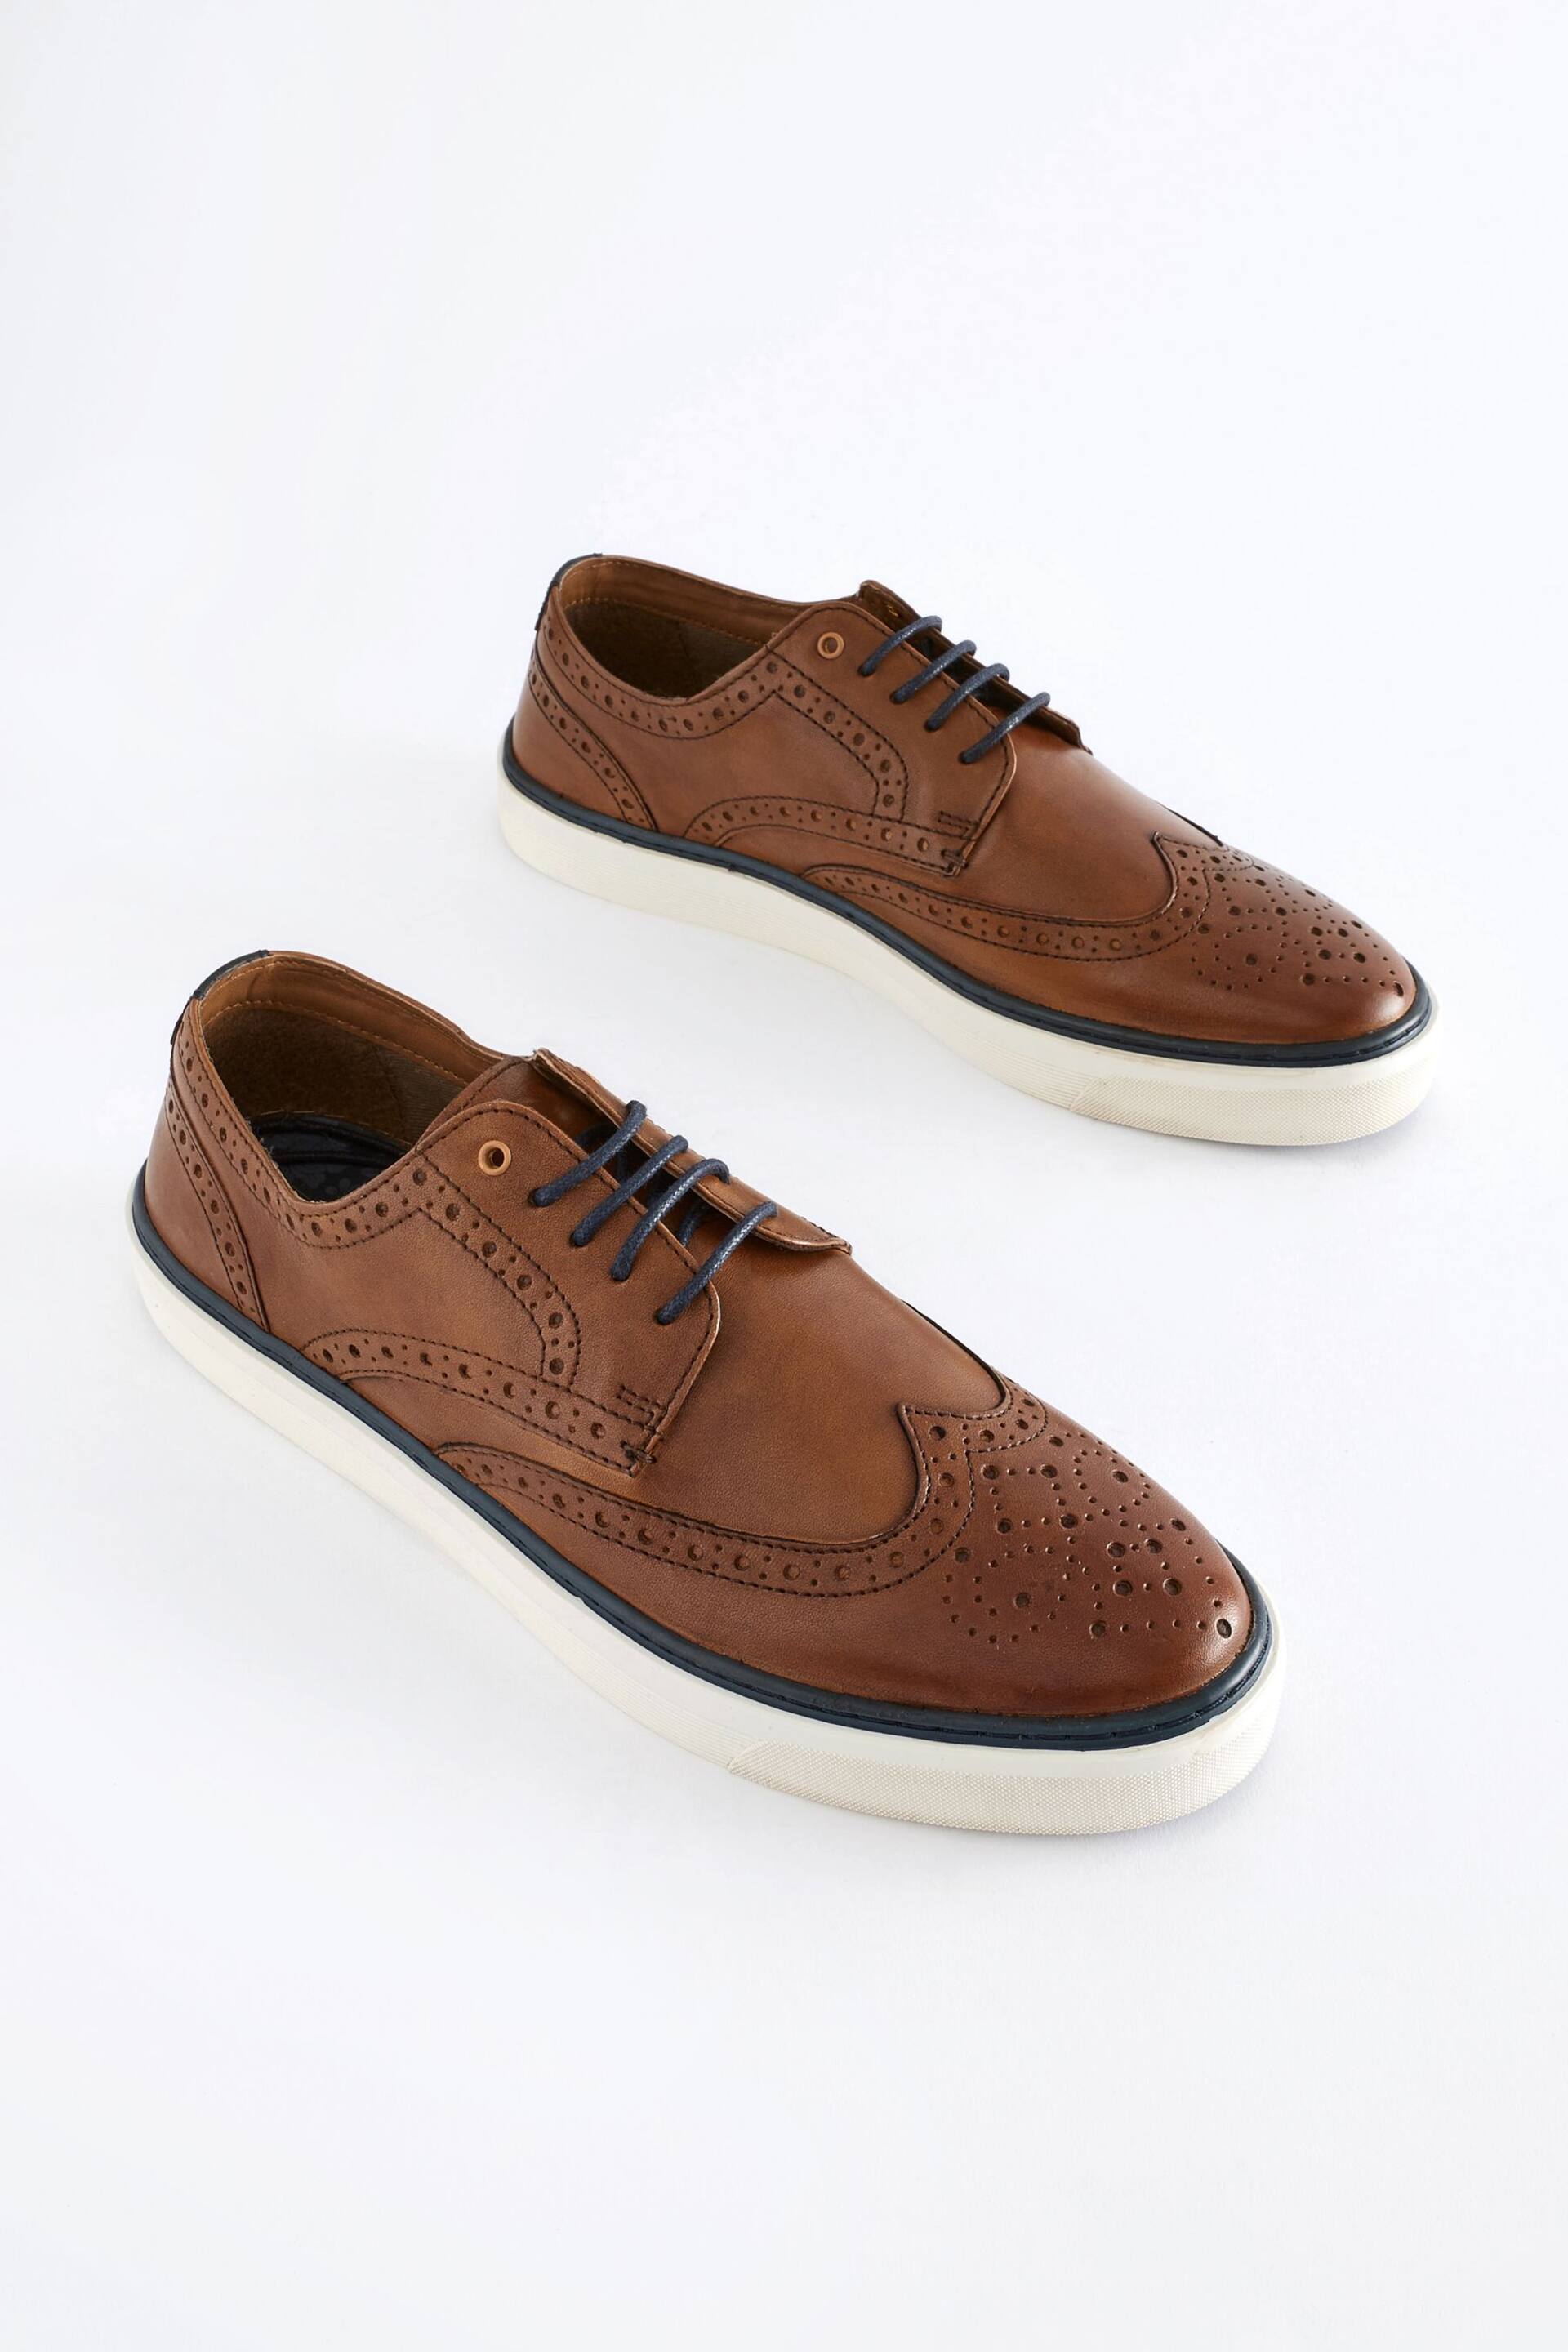 Tan Brown Leather Brogue Cupsole Shoes - Image 1 of 8